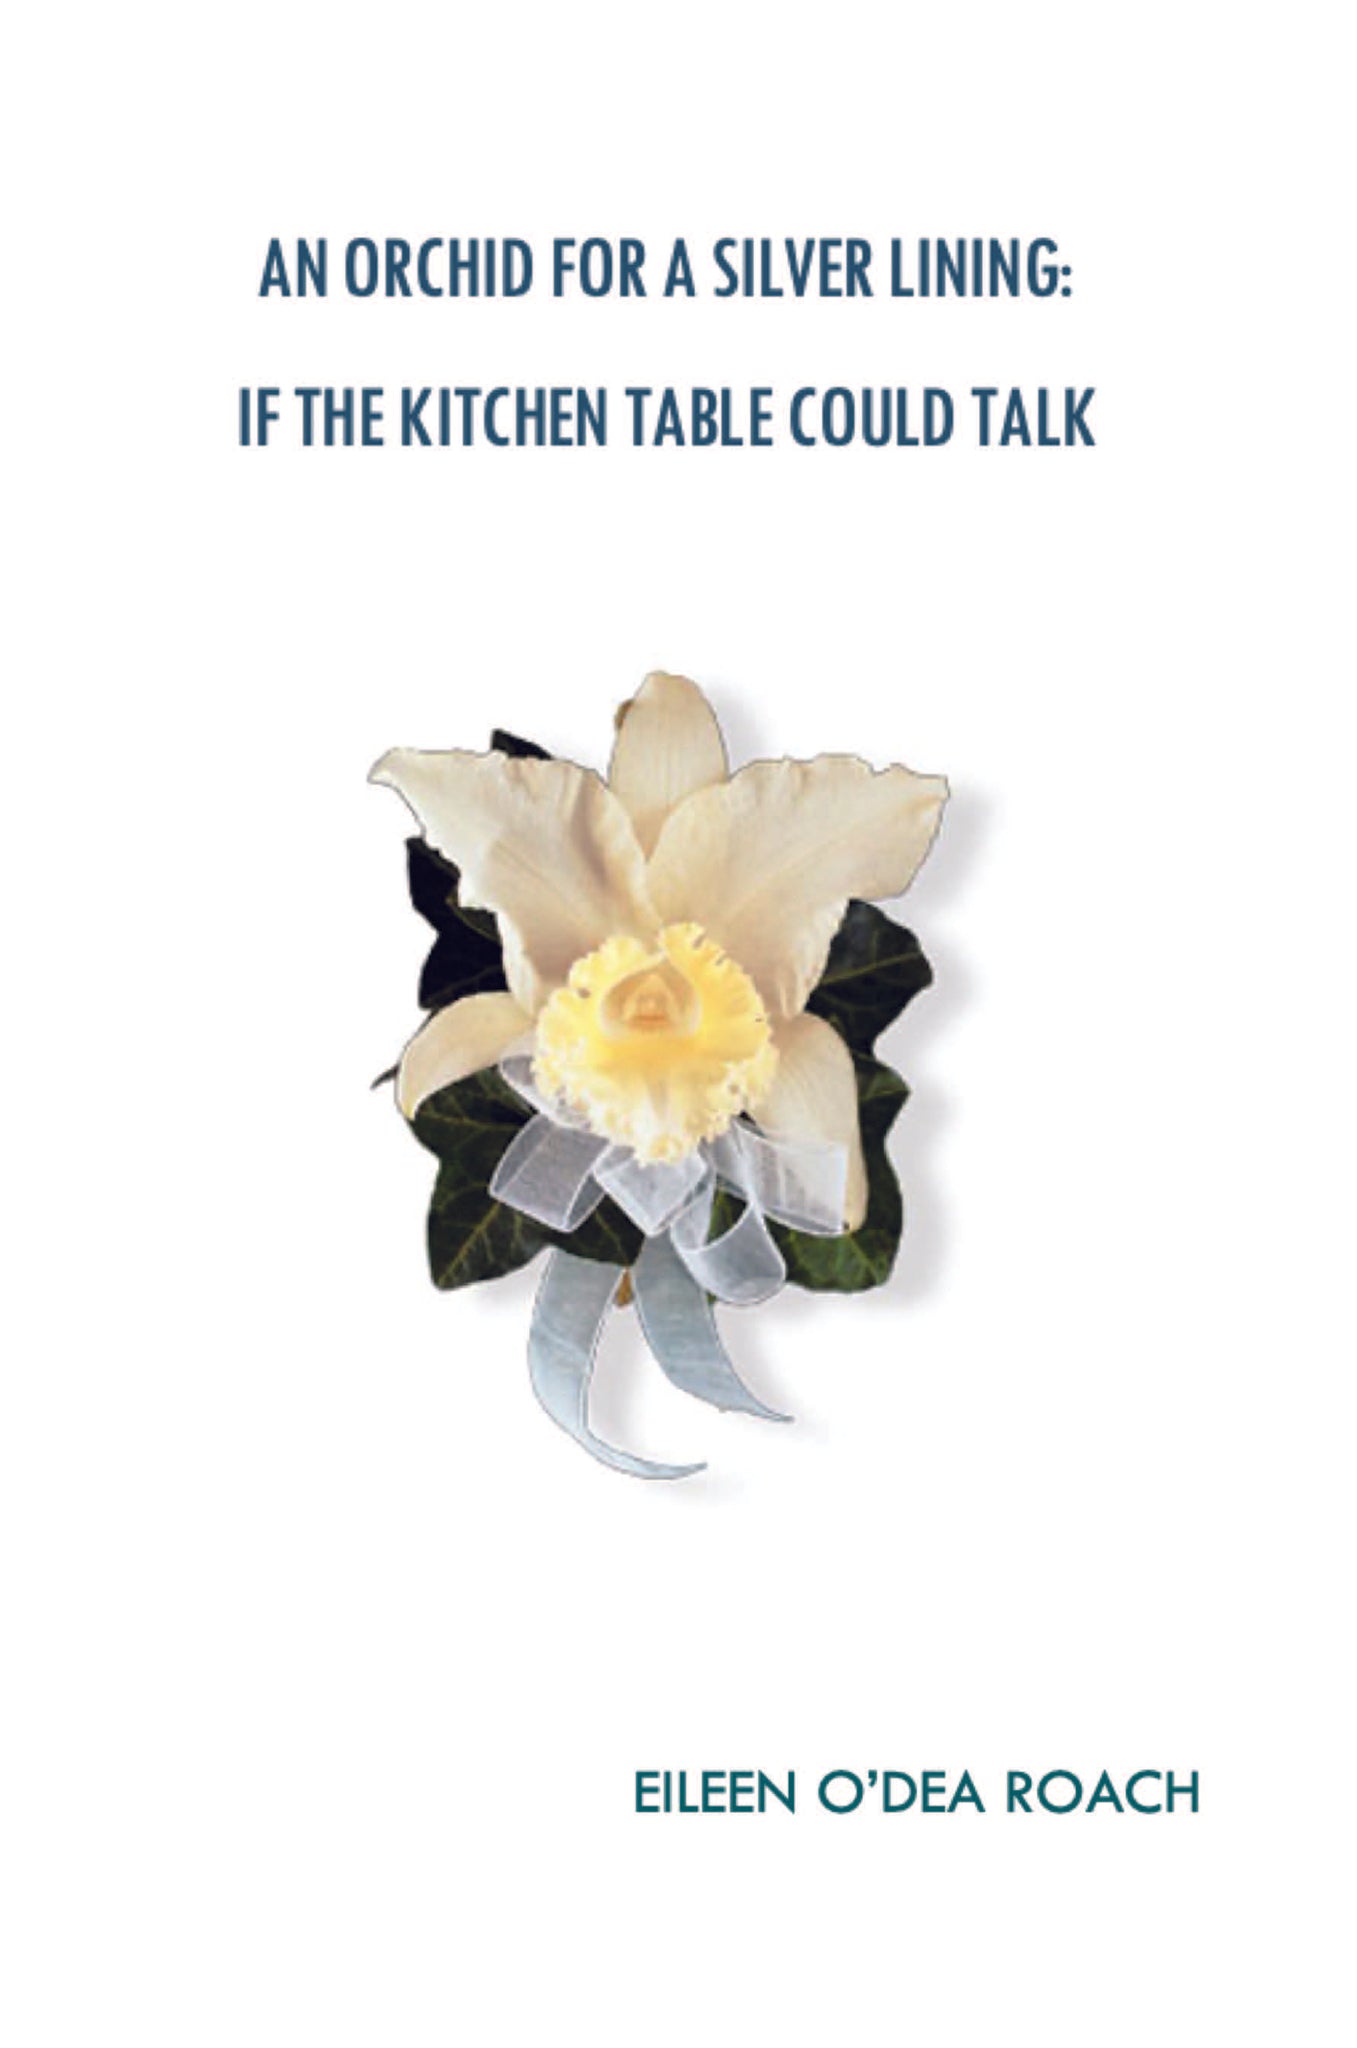 An Orchid for a Silver Lining: If the Kitchen Table Could Talk